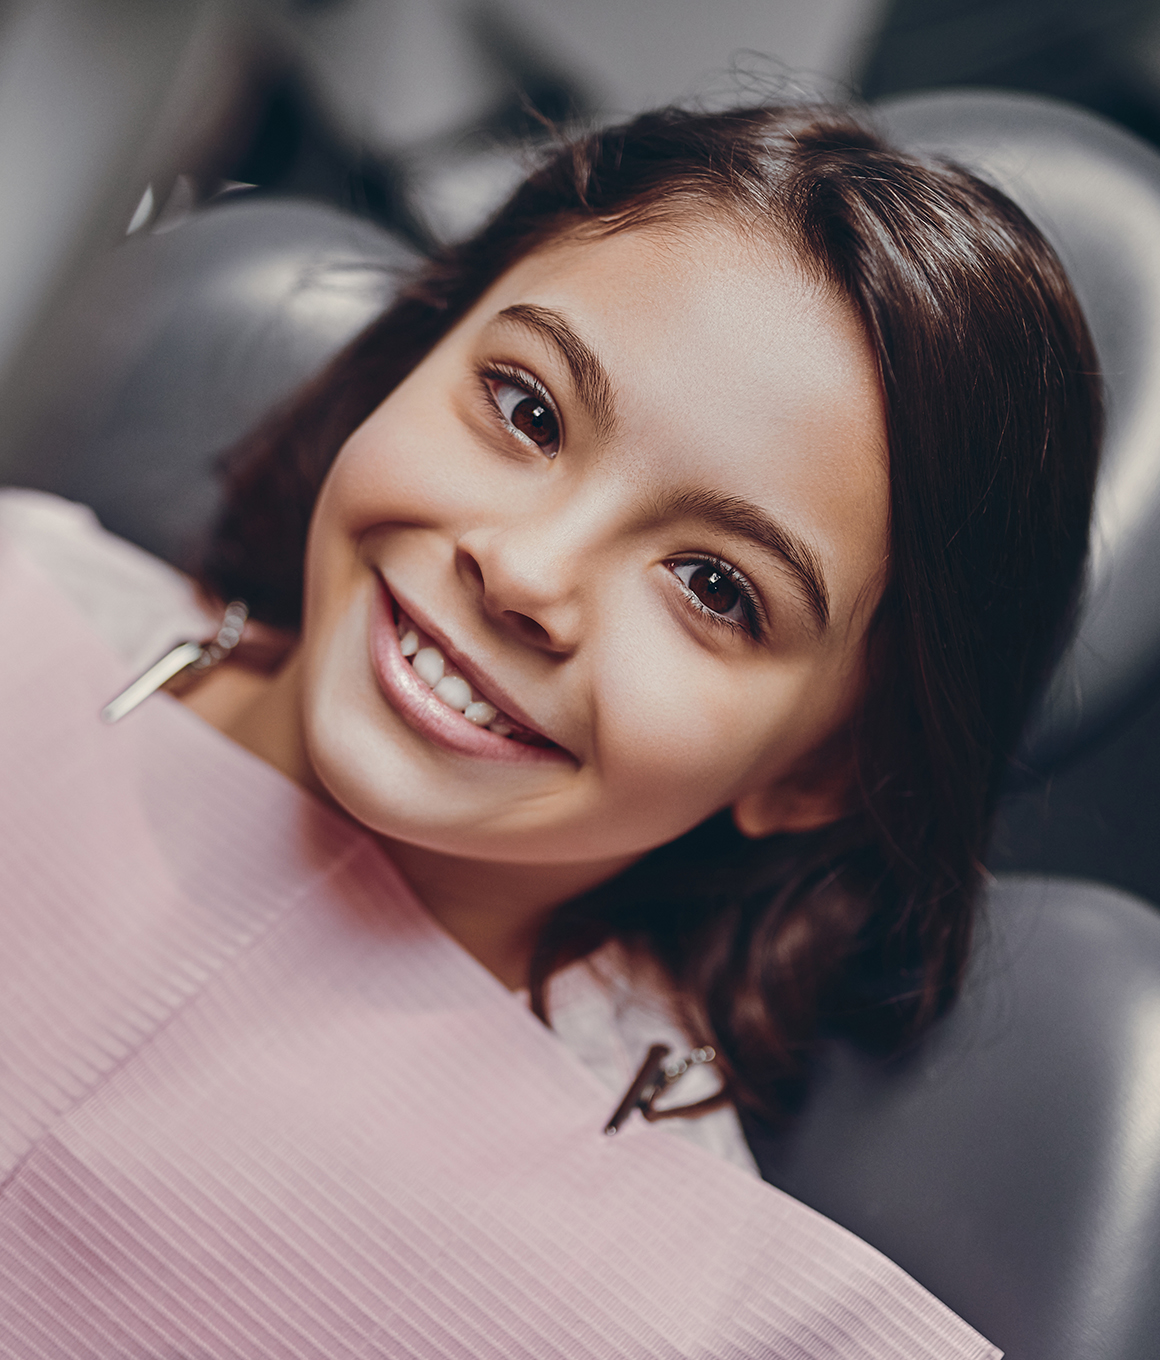 Smiling young girl in dental chair looking up